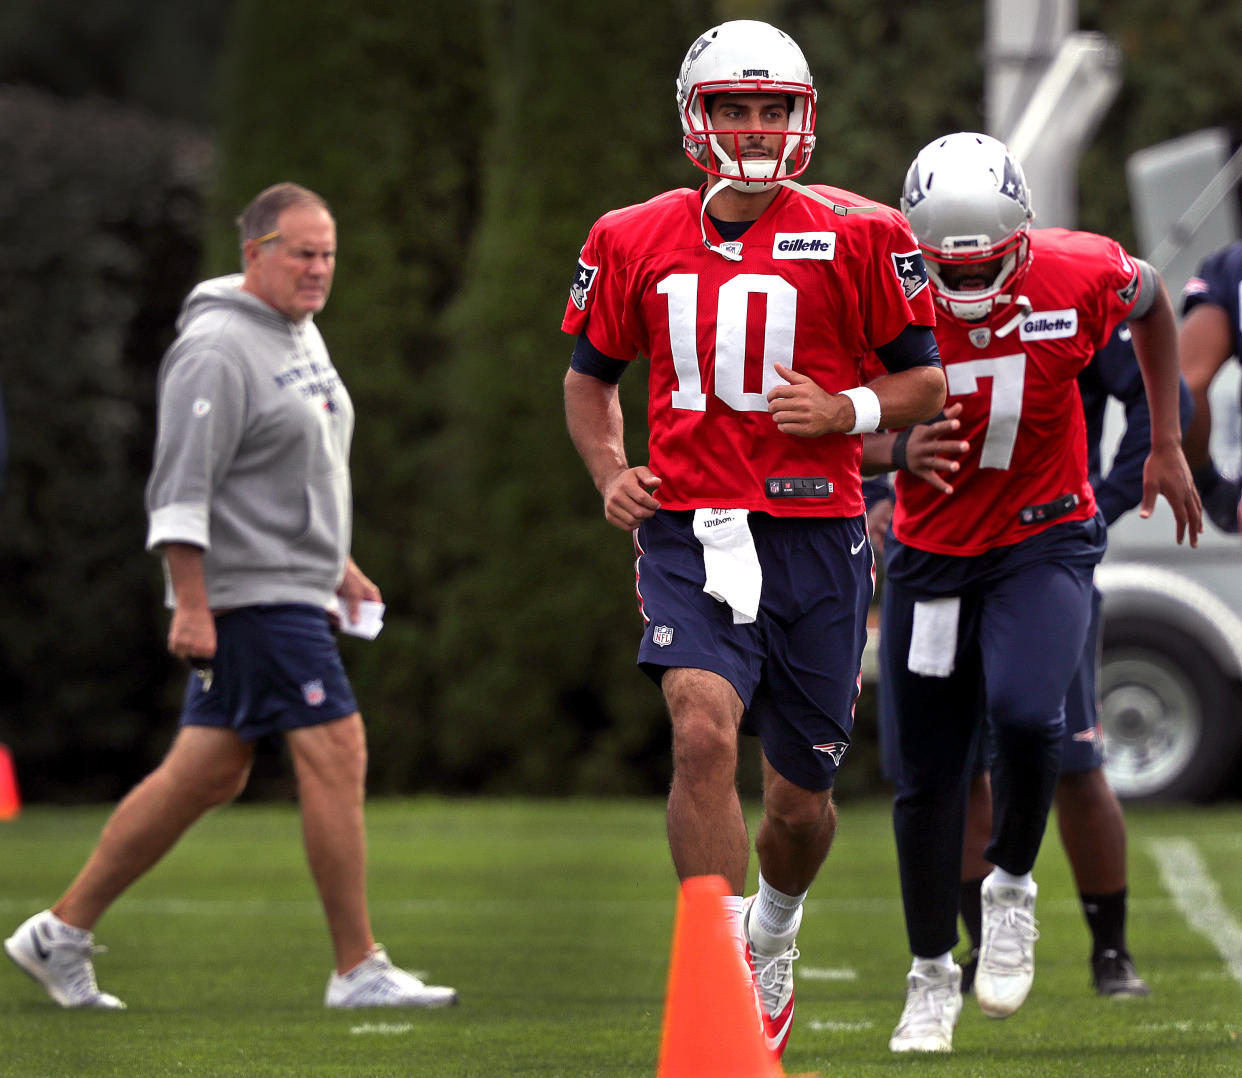 Rookies and QBs not named Tom Brady don't get much love from Bill Belichick. (Barry Chin/The Boston Globe via Getty Images)